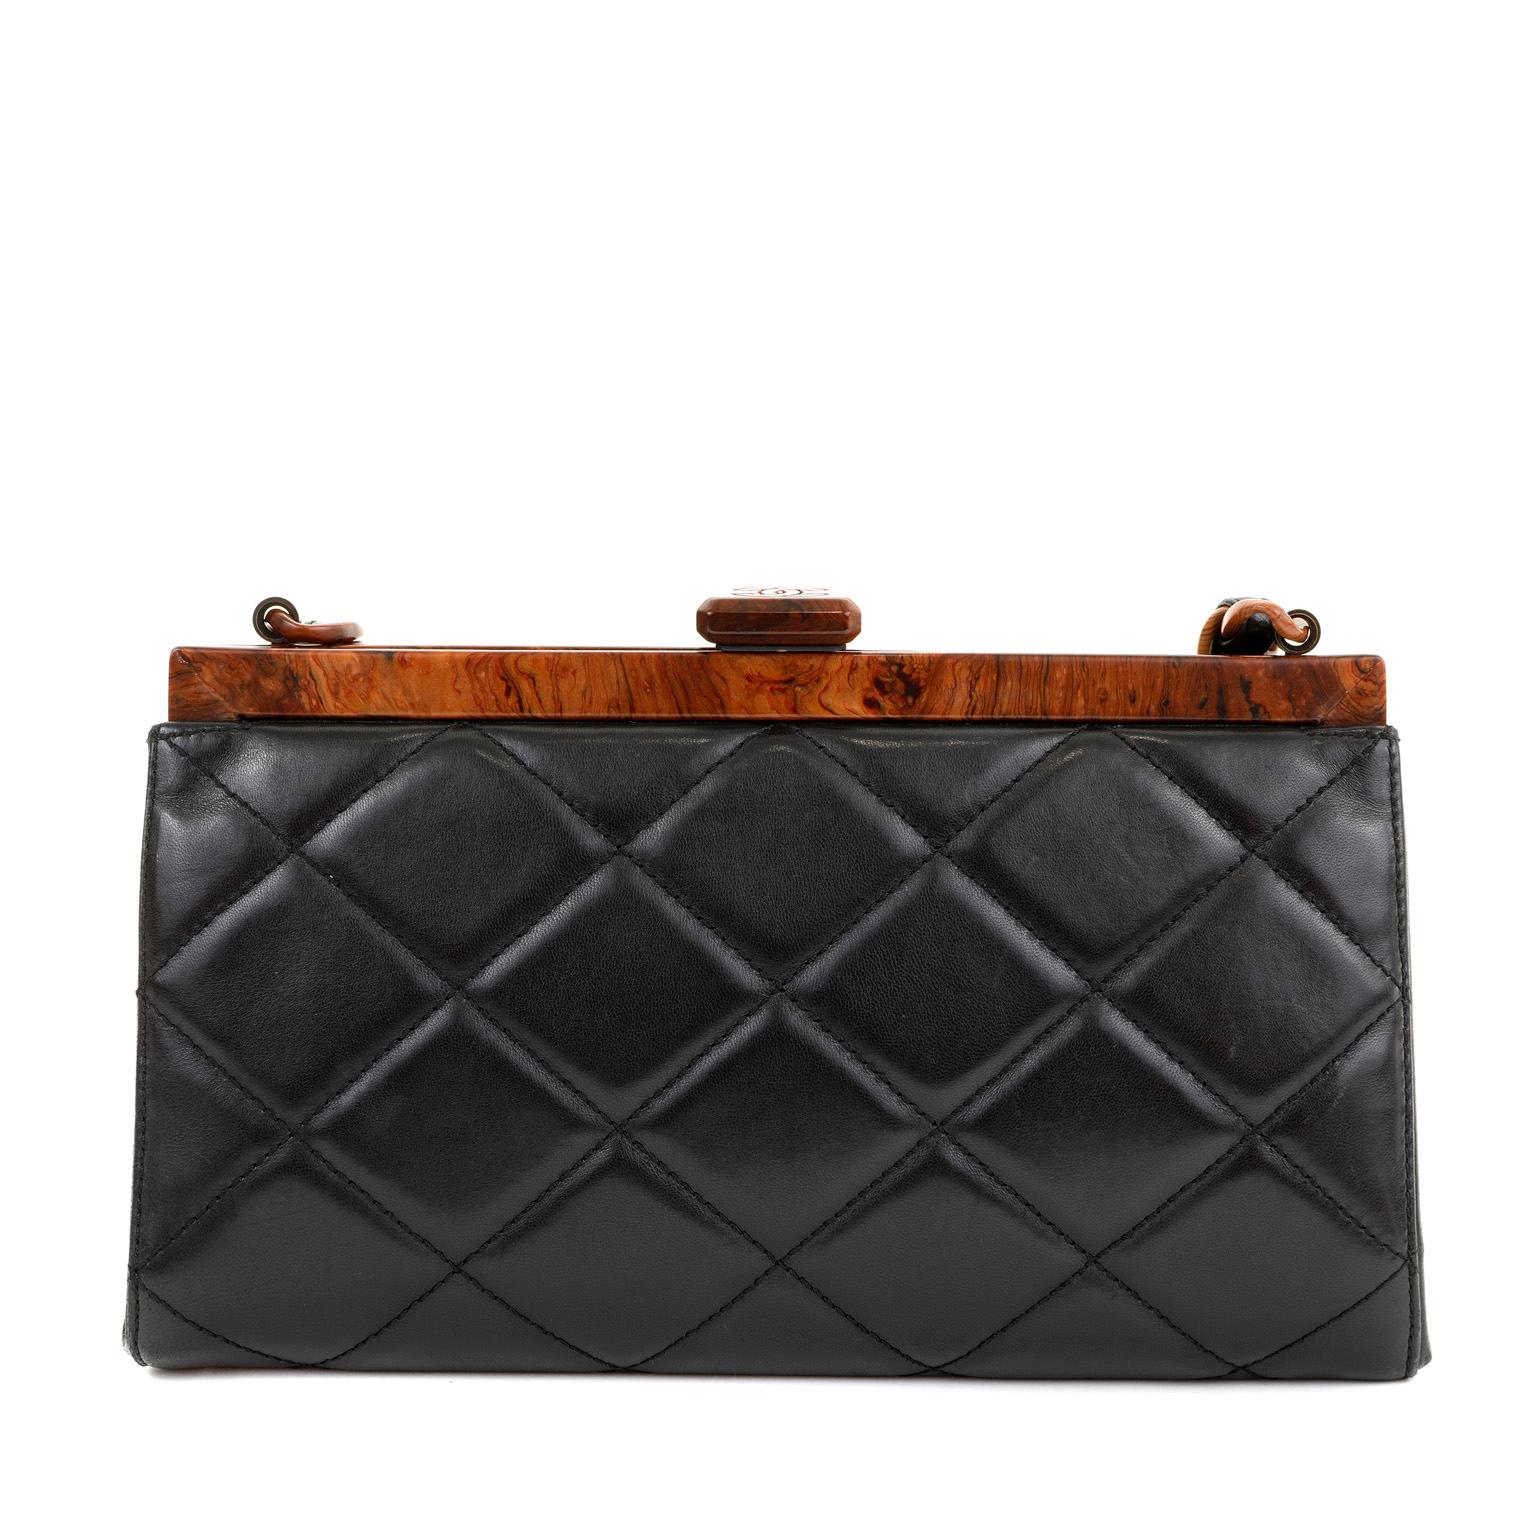 This authentic Chanel Black Quilted Leather Wood Framed Bag is in pristine condition.  Very rare design with resin accents that mimic natural wood elements.  Black quilted leather with framed top and push lock closure. Single leather and “wood” link